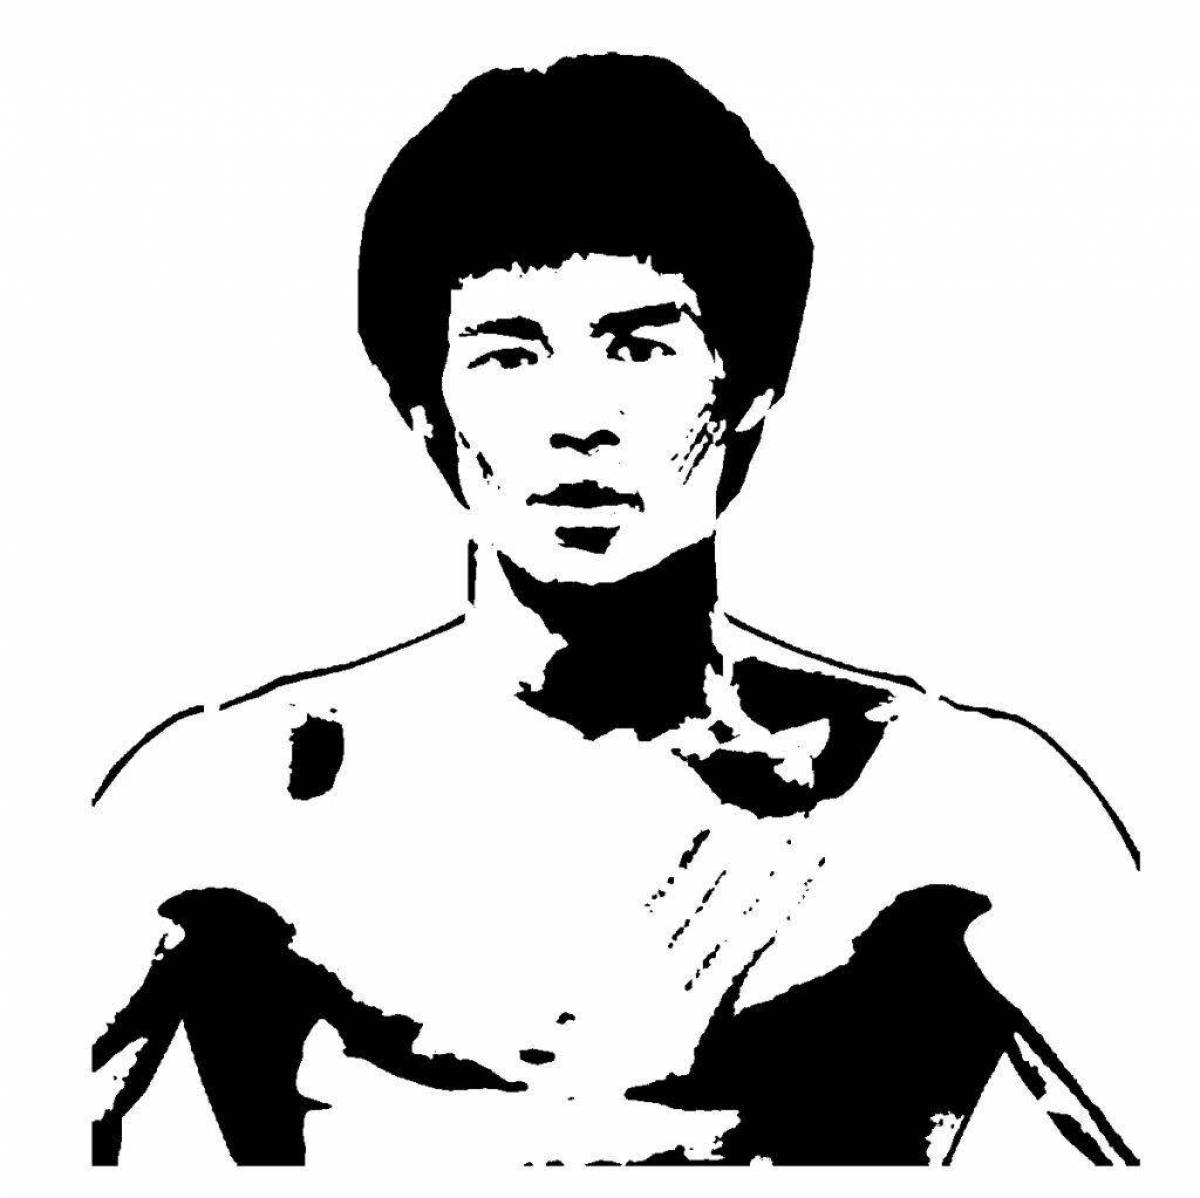 Bruce lee's amazing coloring book